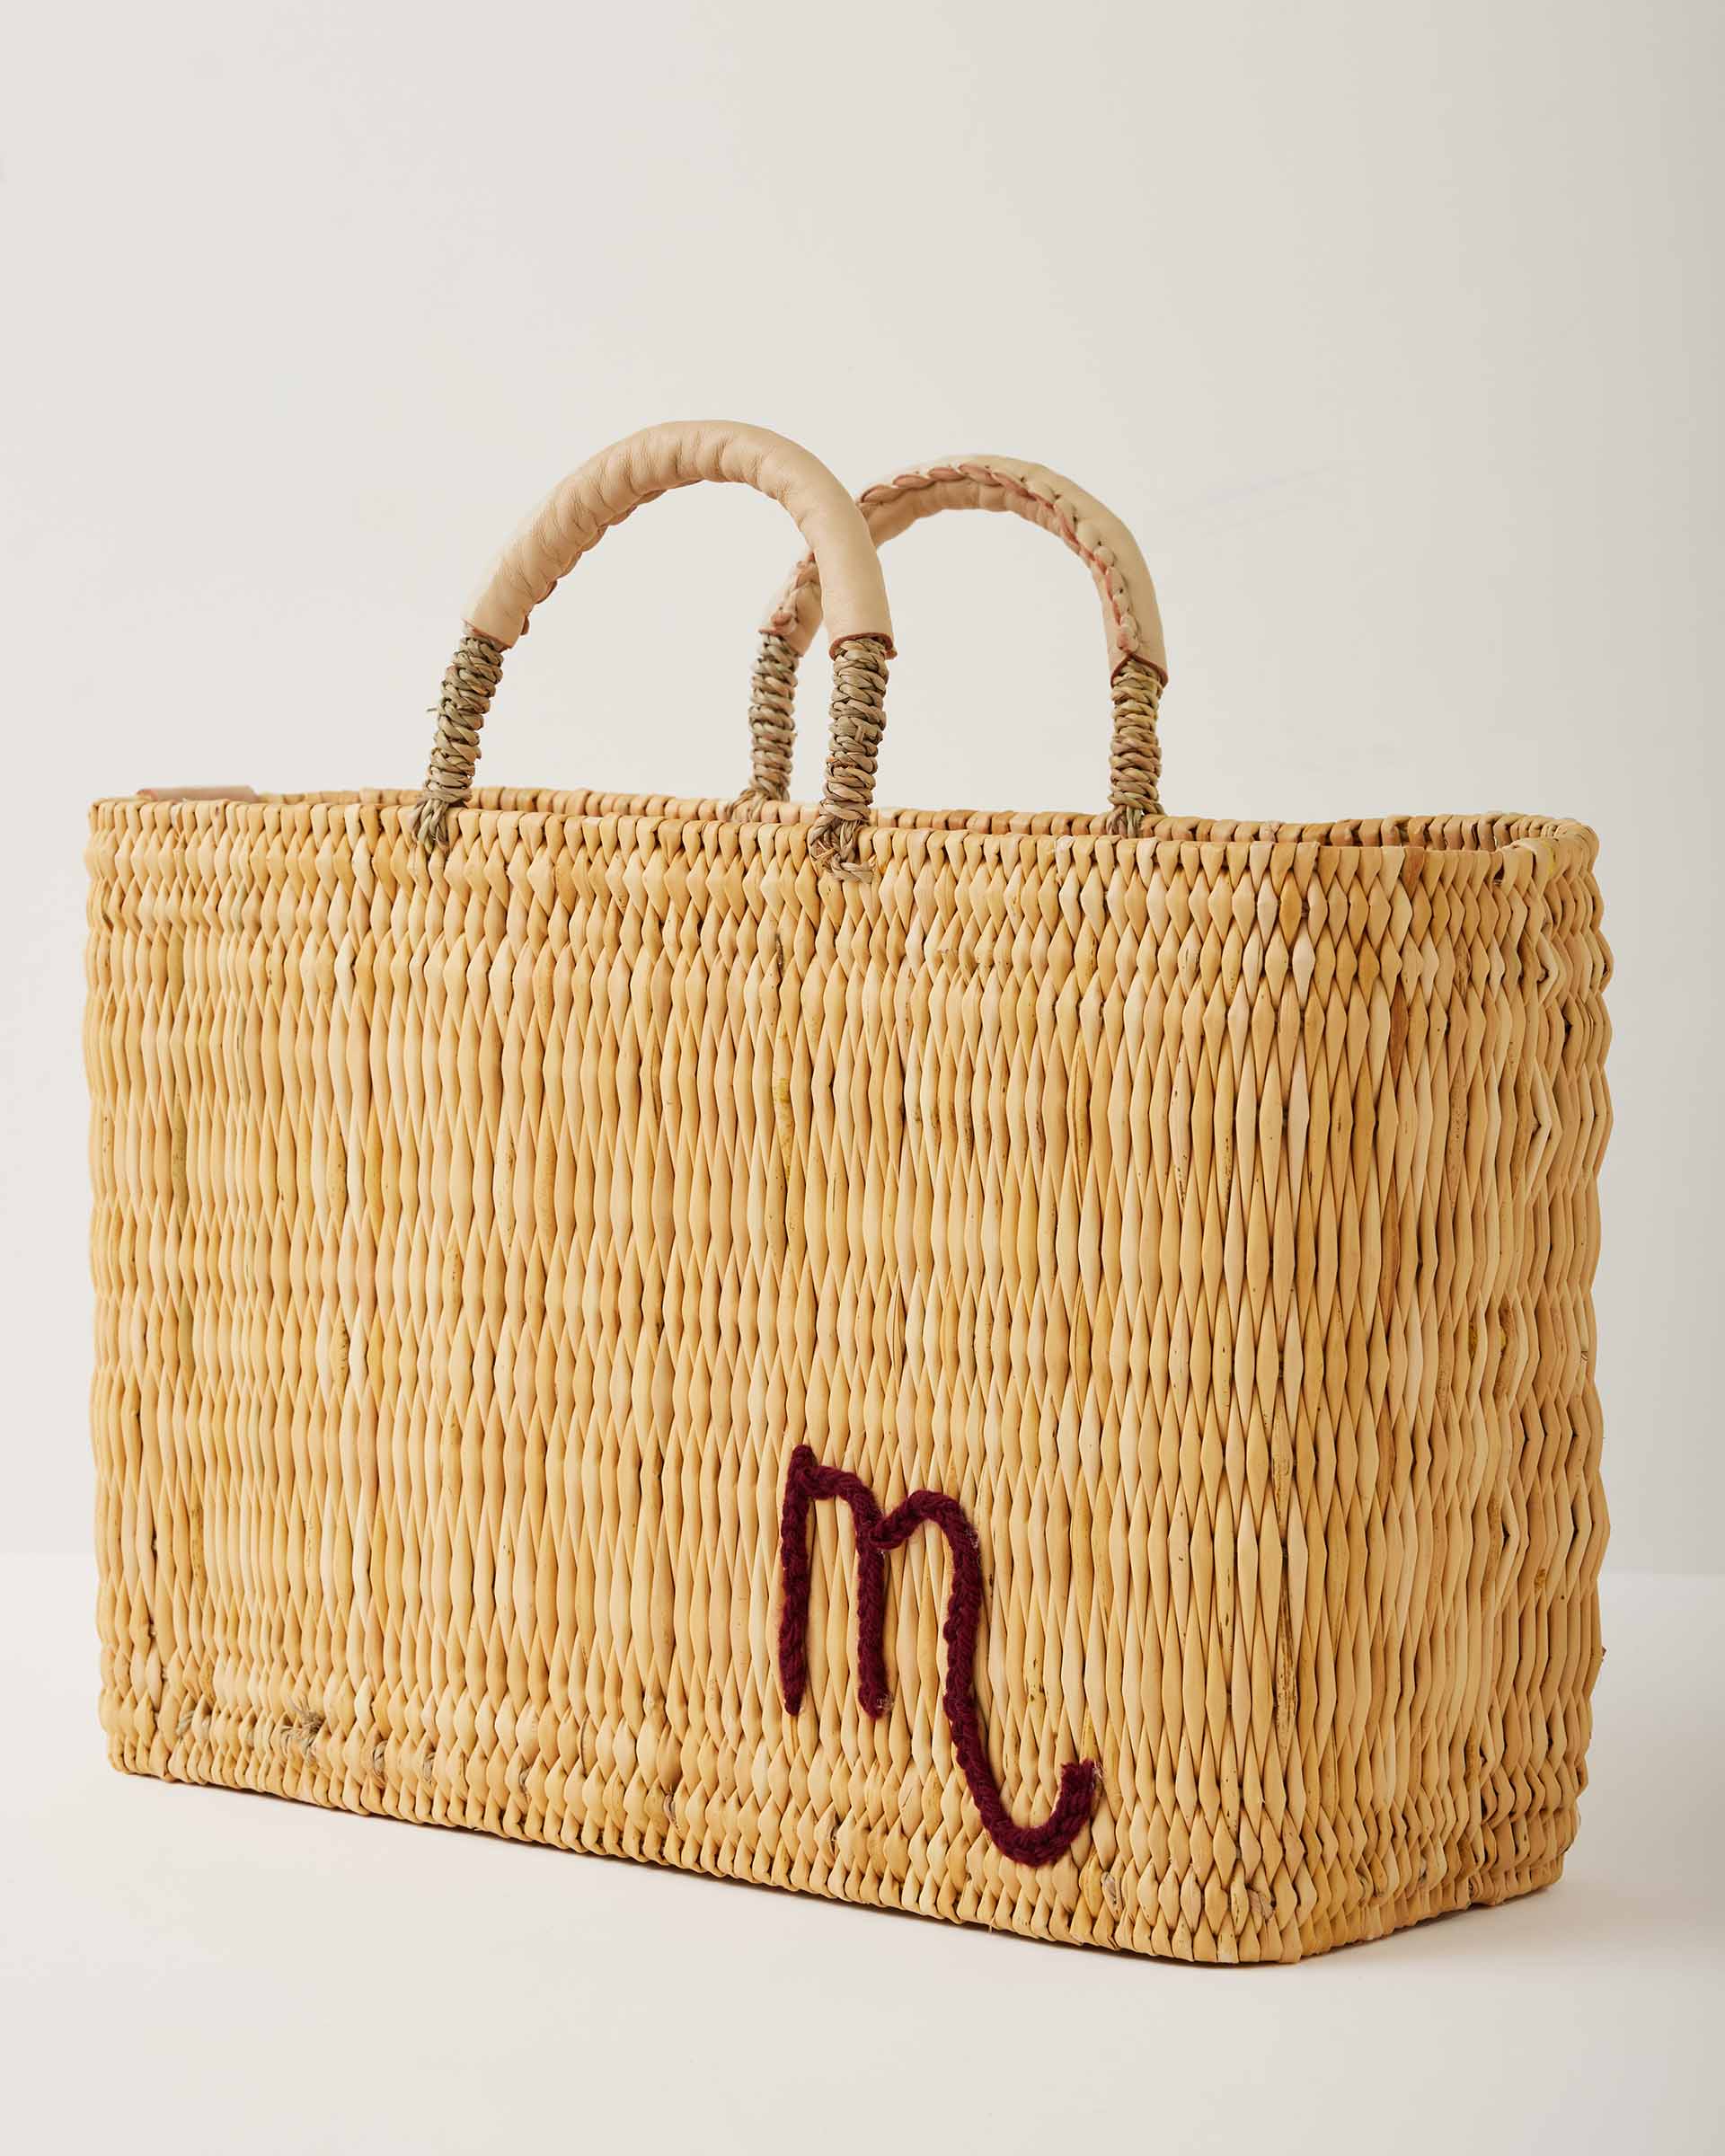 Market straw basket with tan leather handles and Scorpio symbol embroidered in maroon